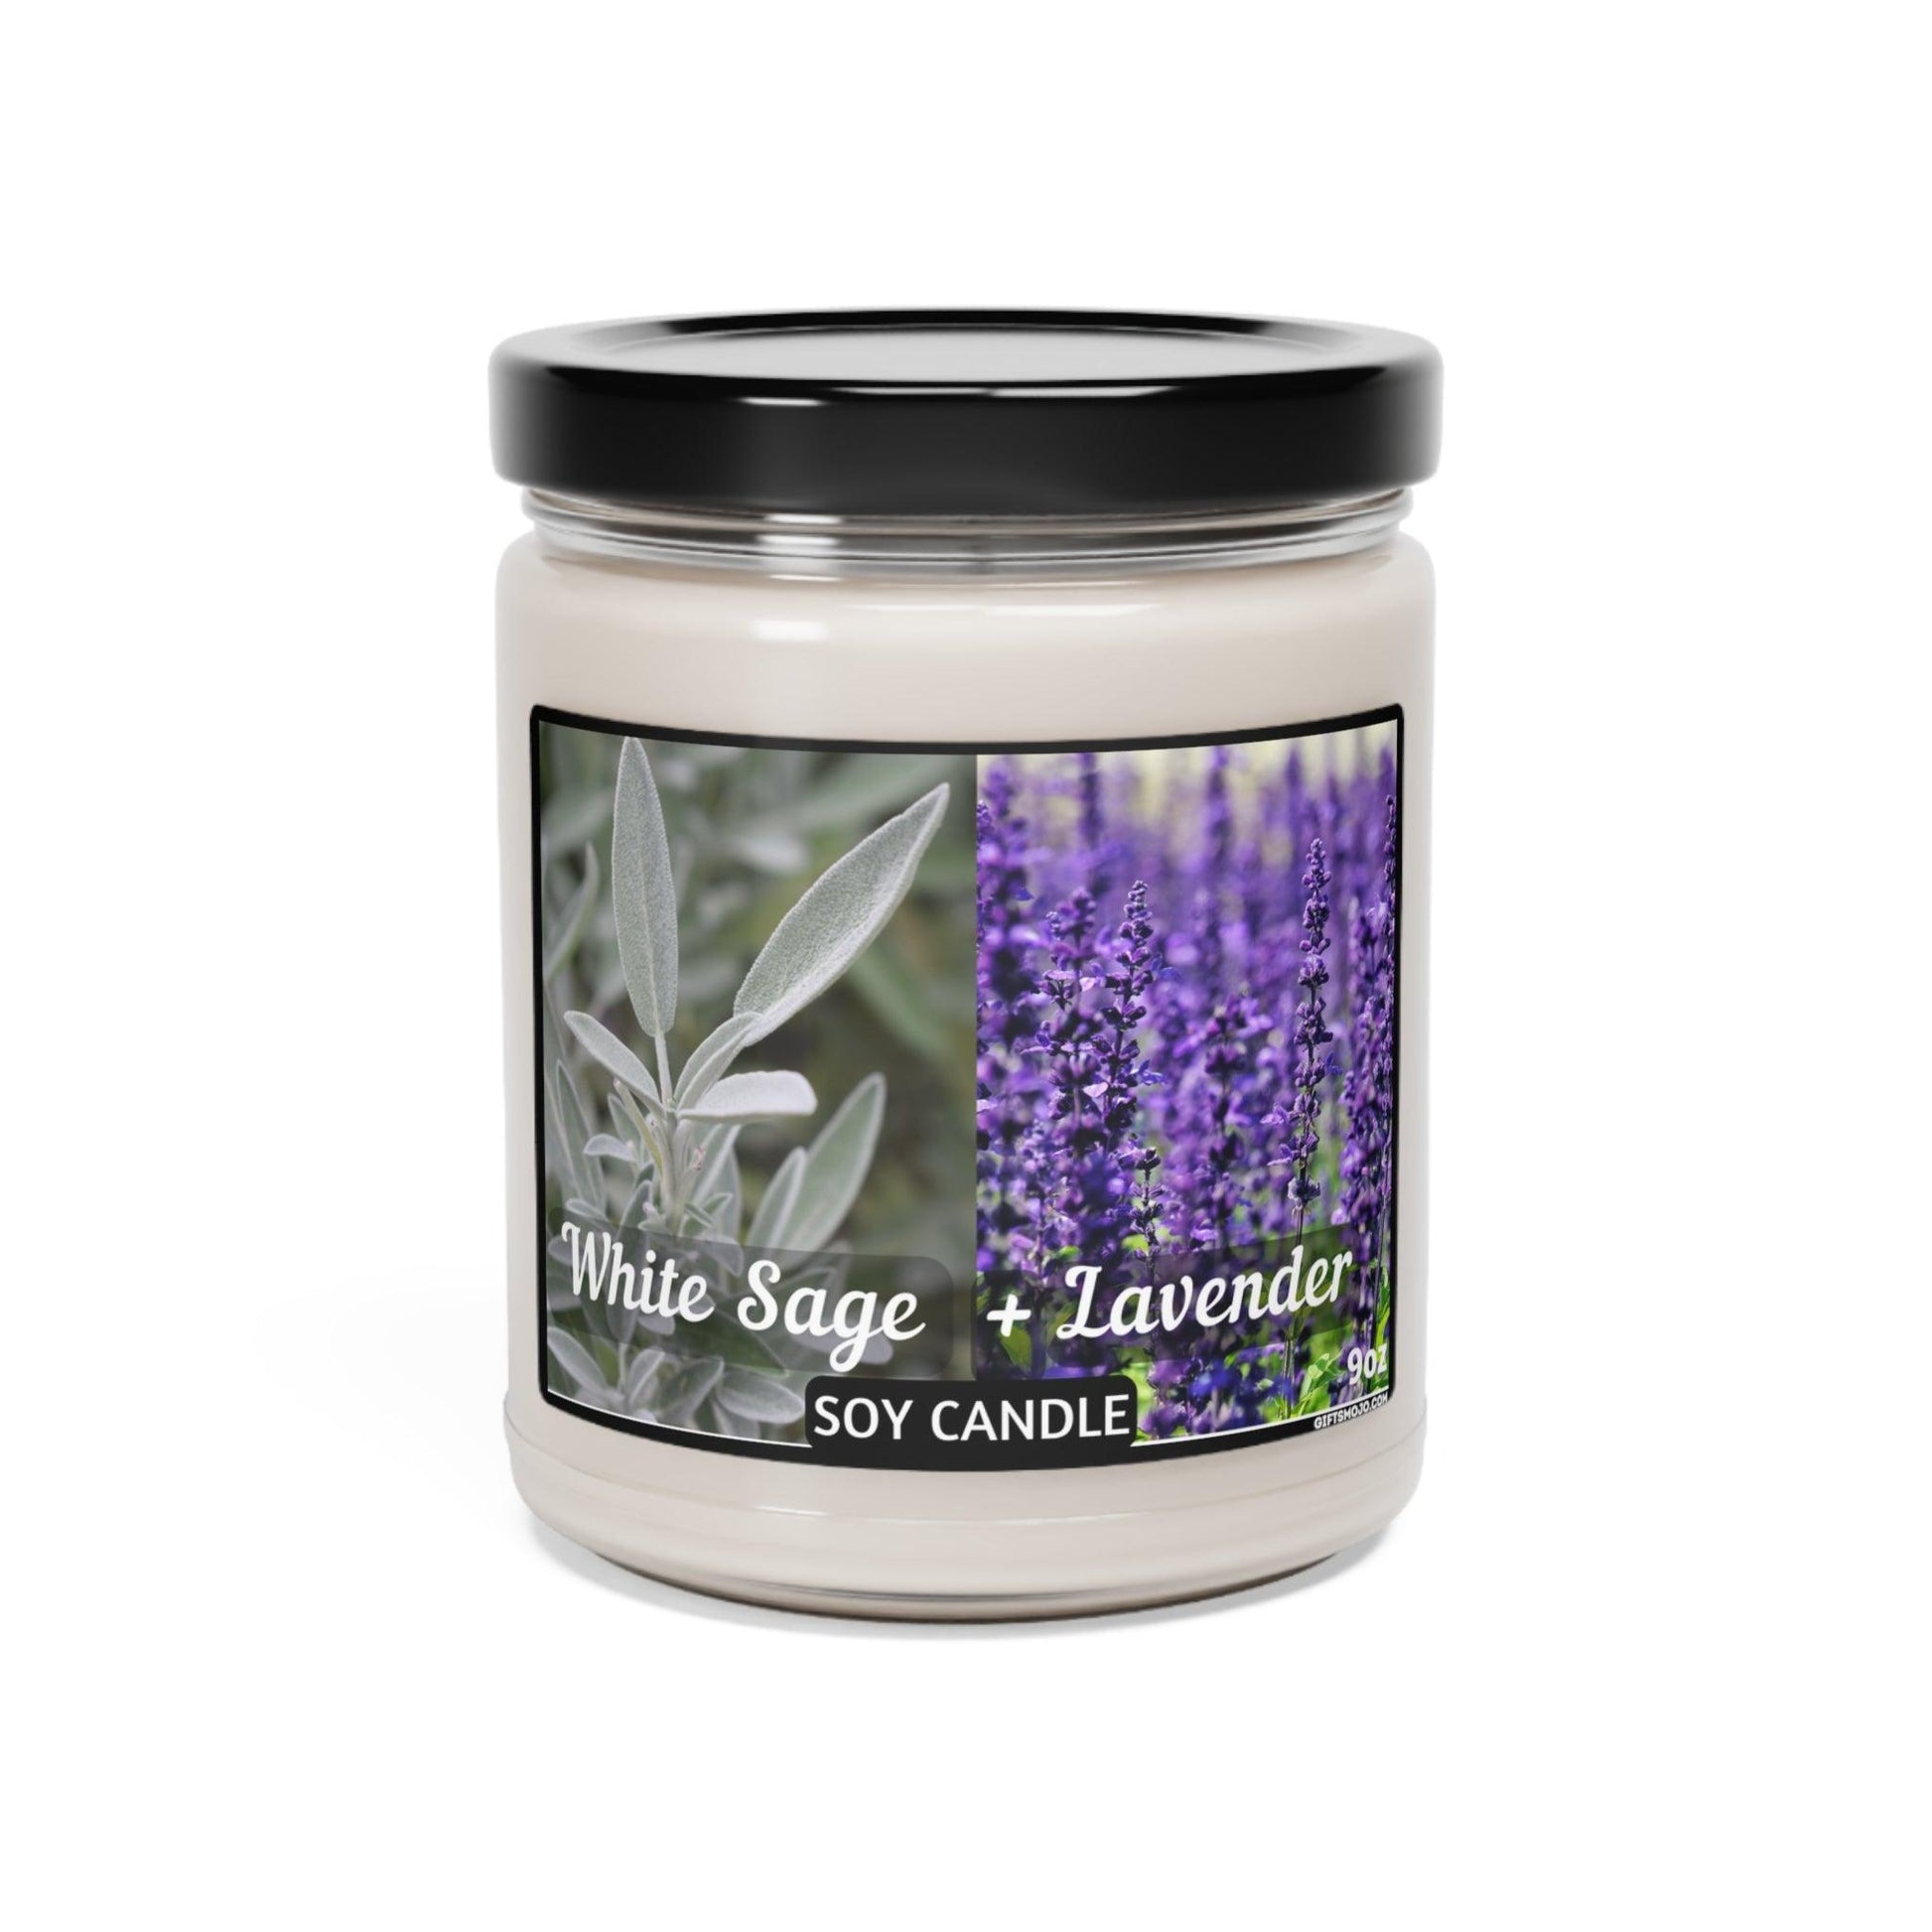 Scented Soy Candle, Clean Cotton, Sea Salt Orchid, White Sage Lavender, Cinnamon Vanilla, Apple Harvest, 9oz, - Giftsmojo